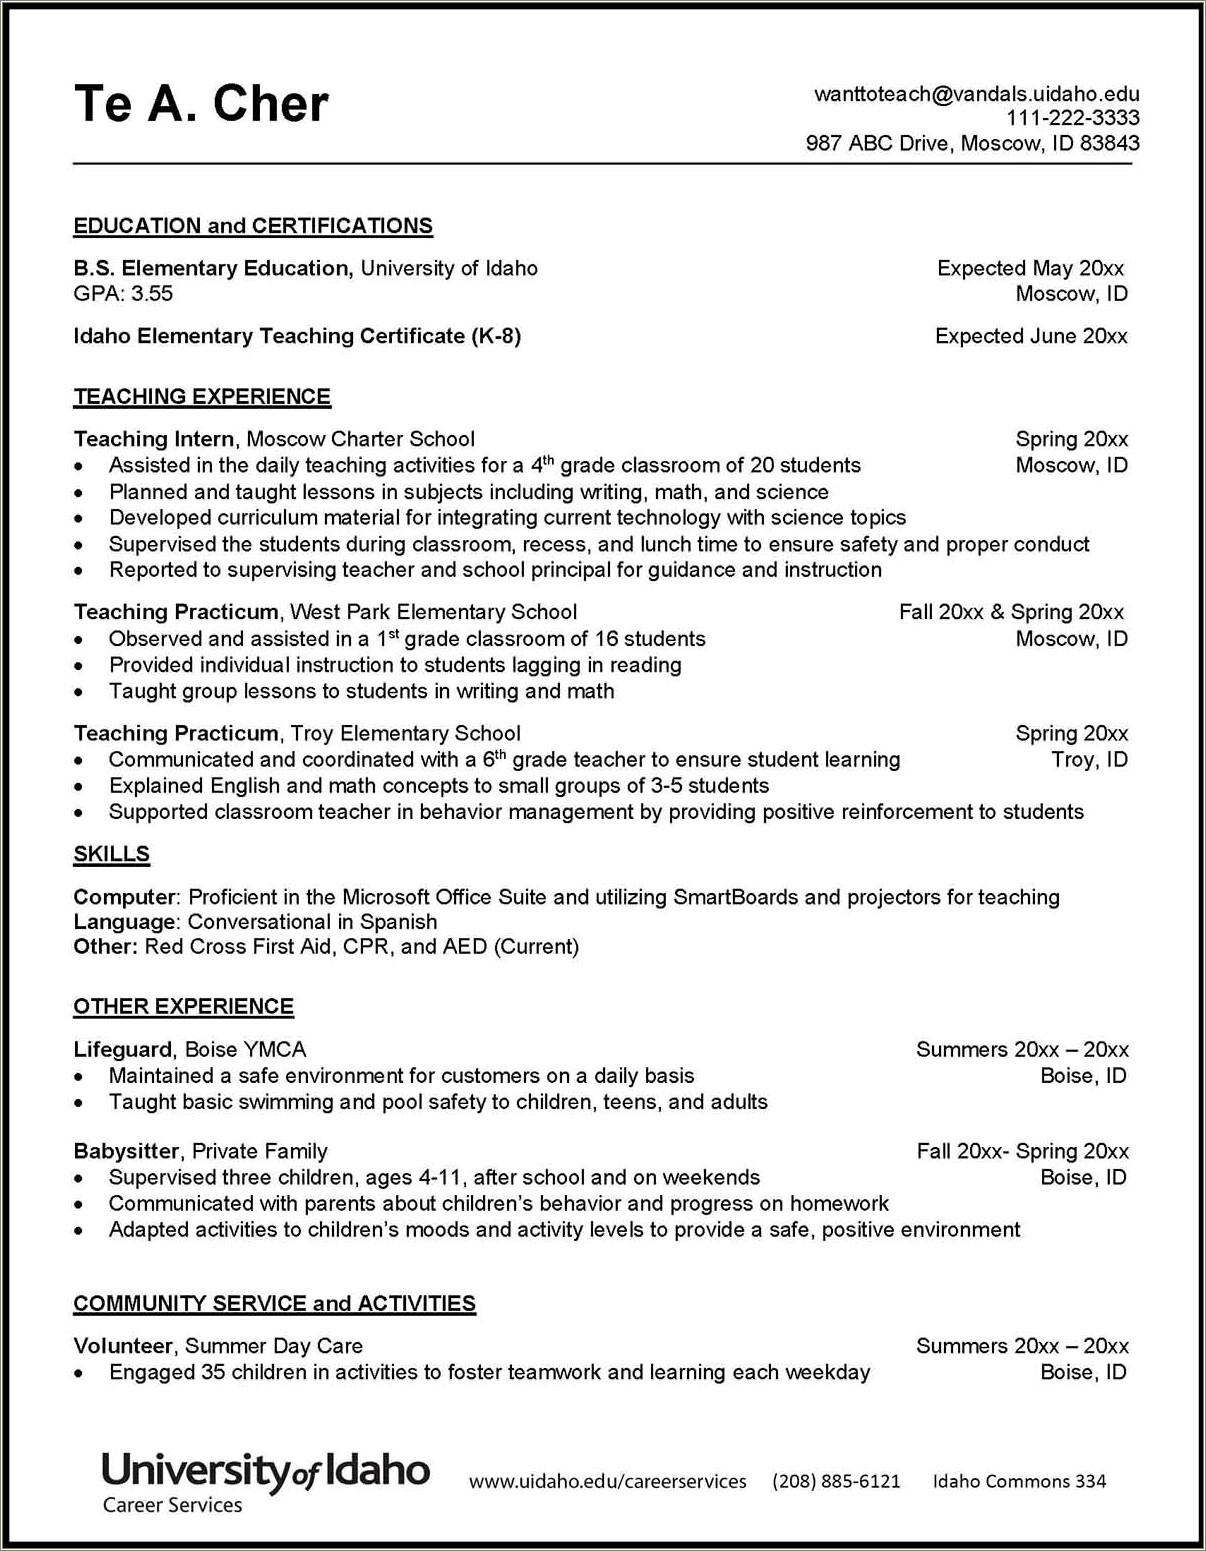 Printable Resume Objective For A Adult Education